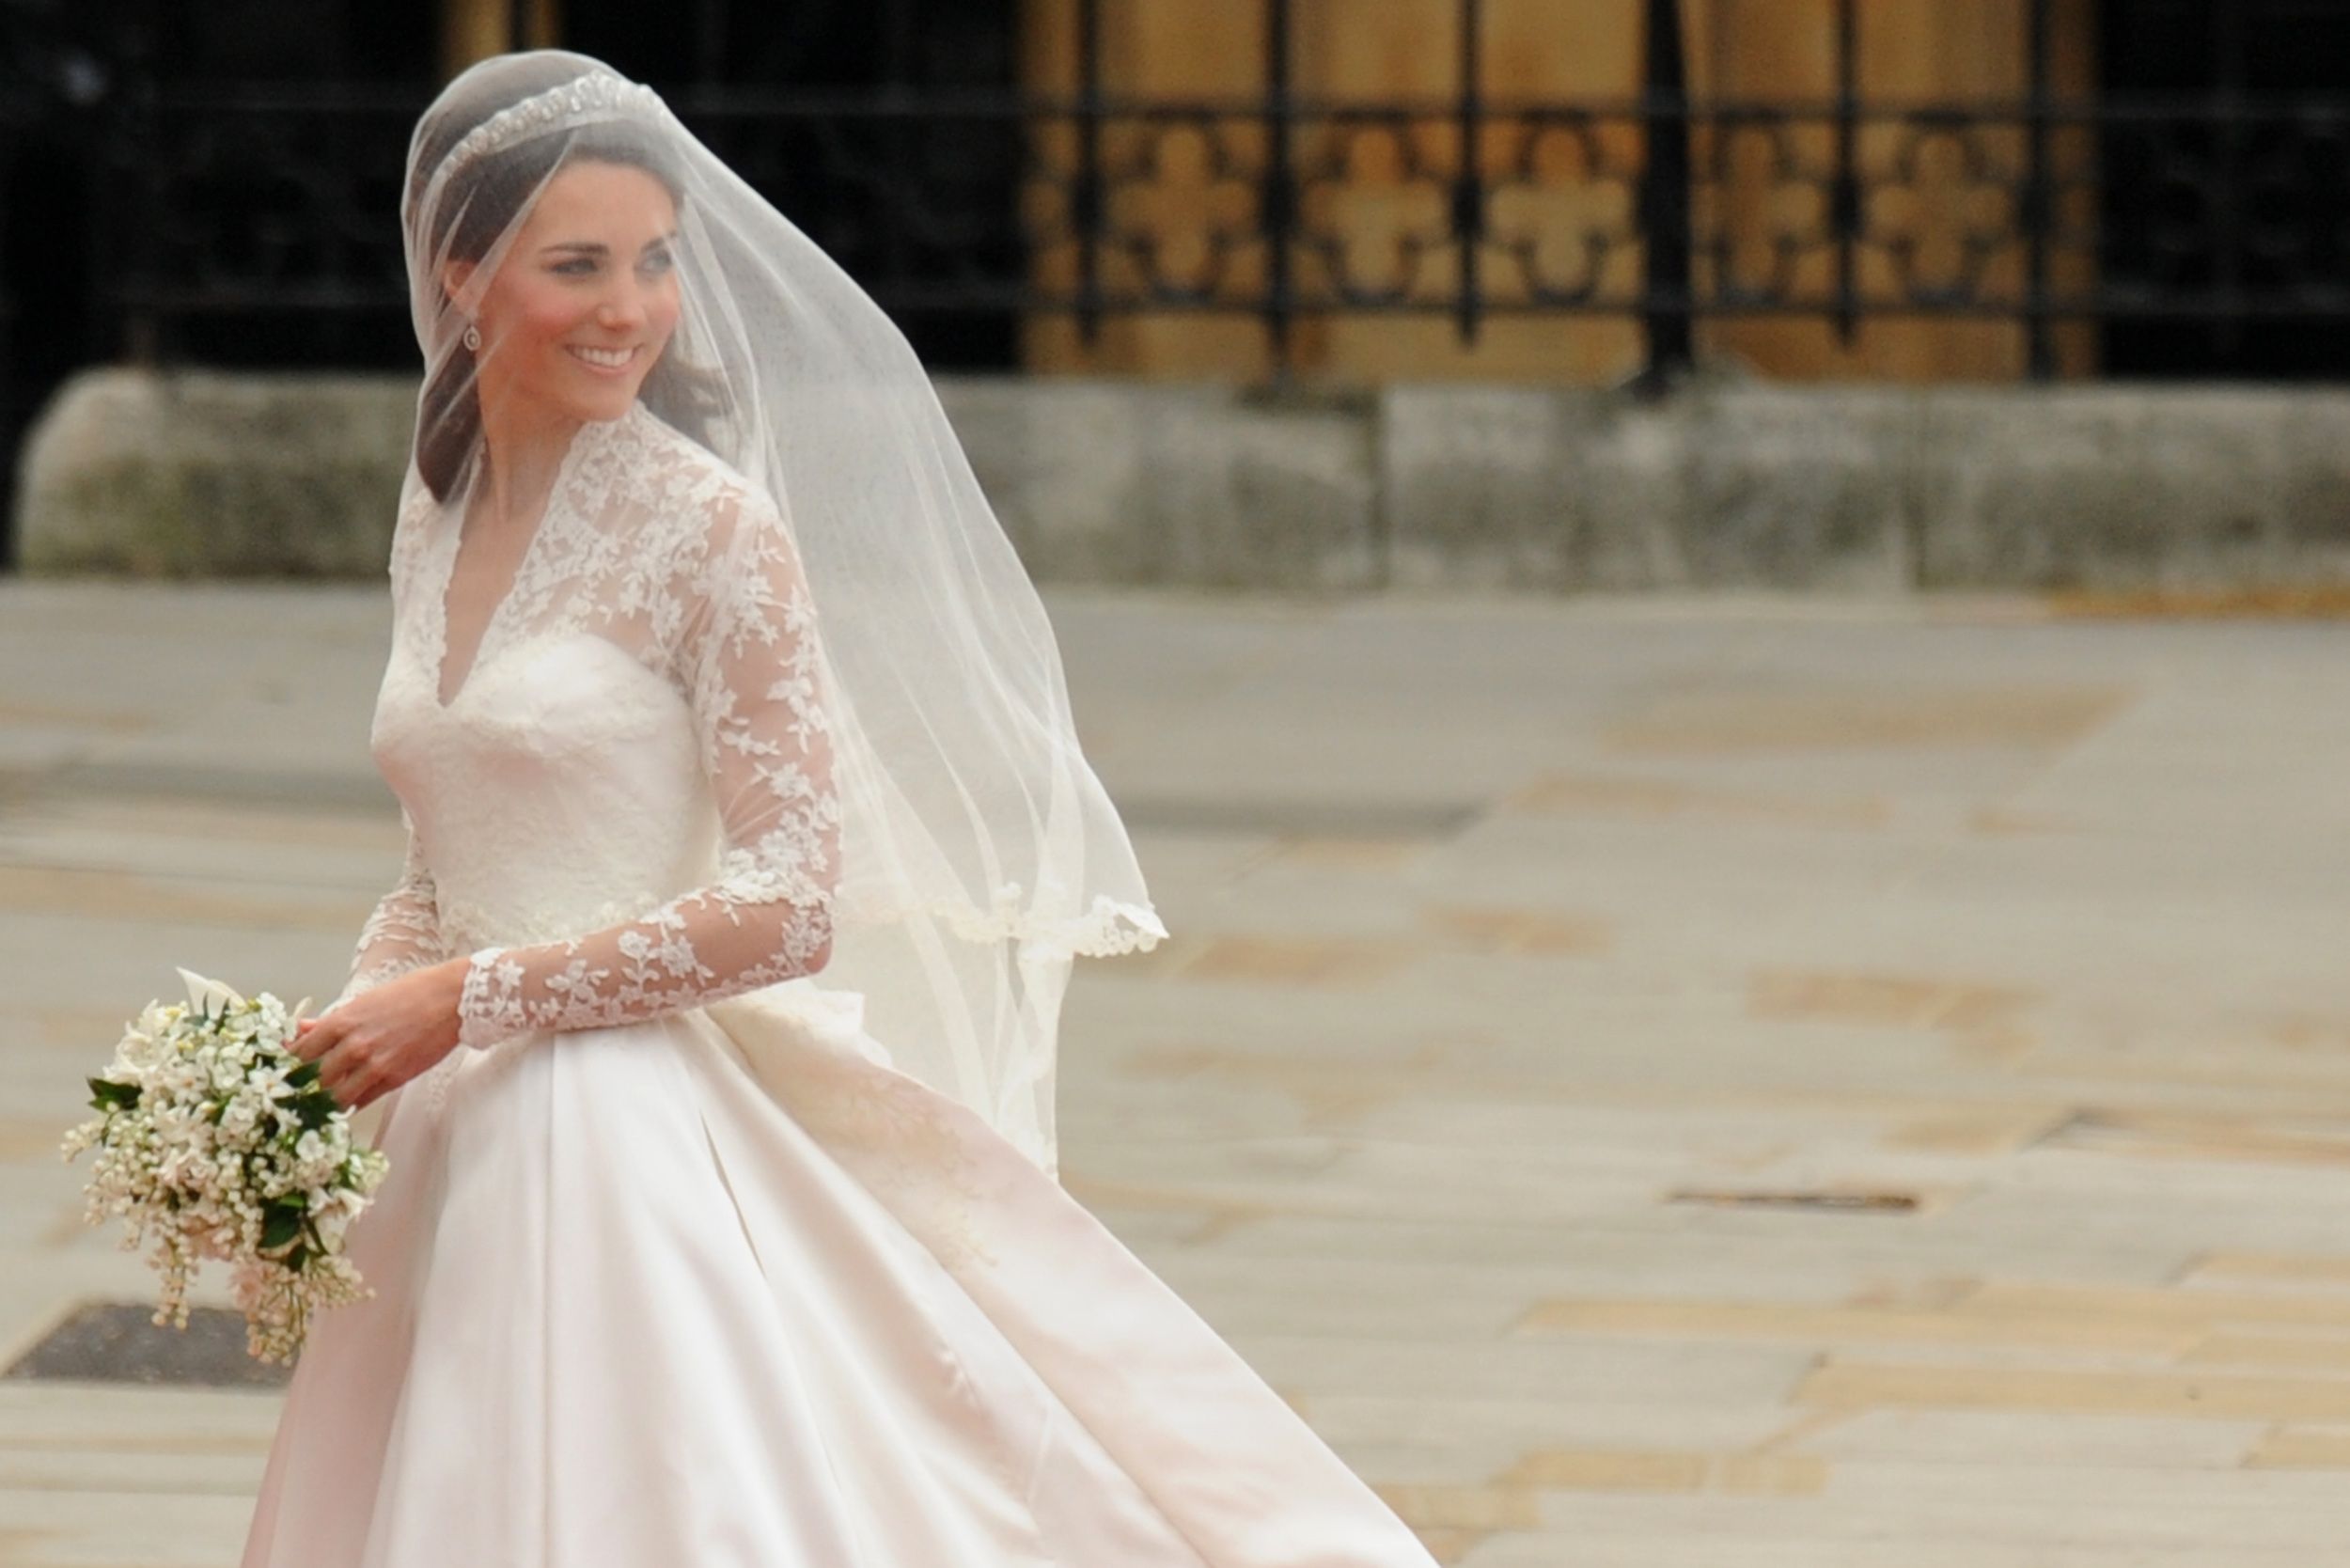 10 Things You Didn't Know About Kate Middleton's Wedding Dress - Sarah Burton the